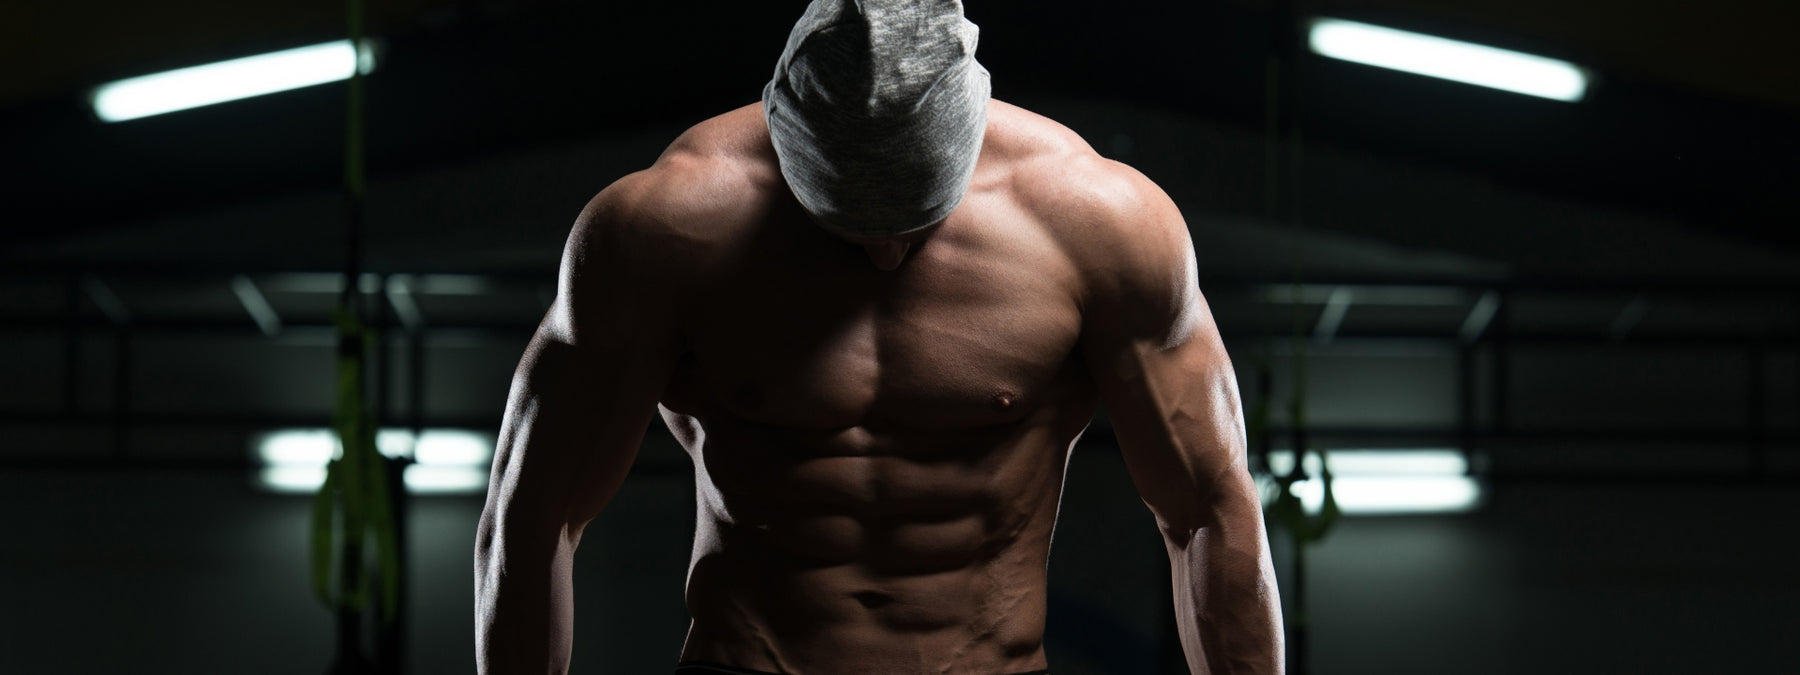 Traps Workout: The Ultimate Specialization Program